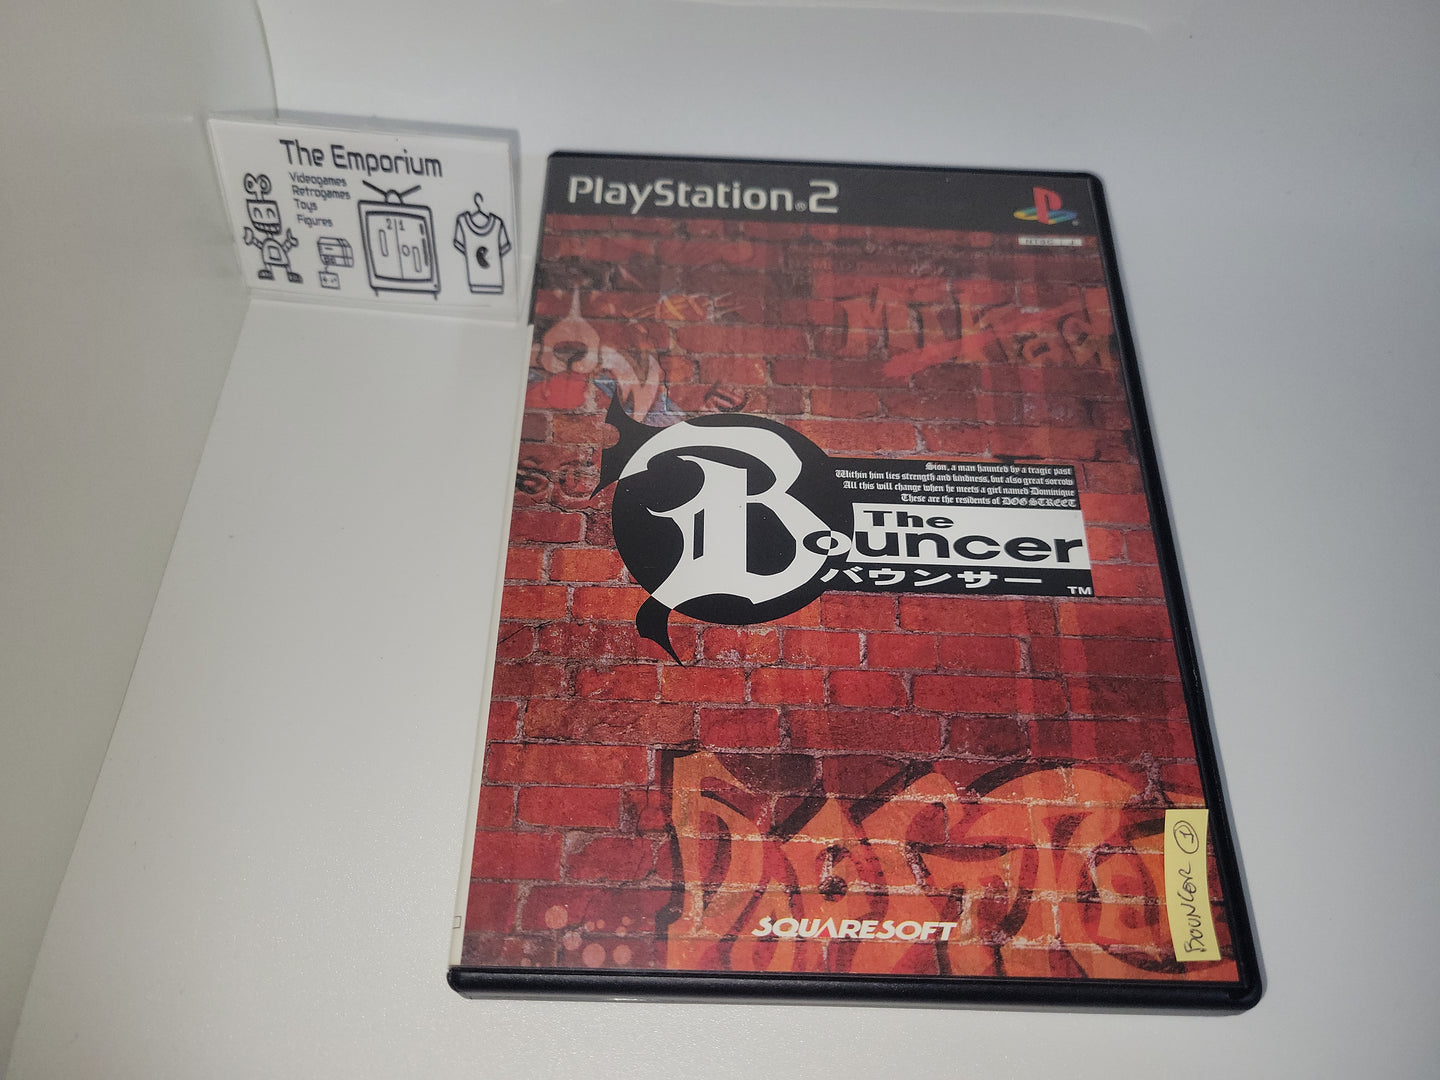 The Bouncer
- Sony playstation 2